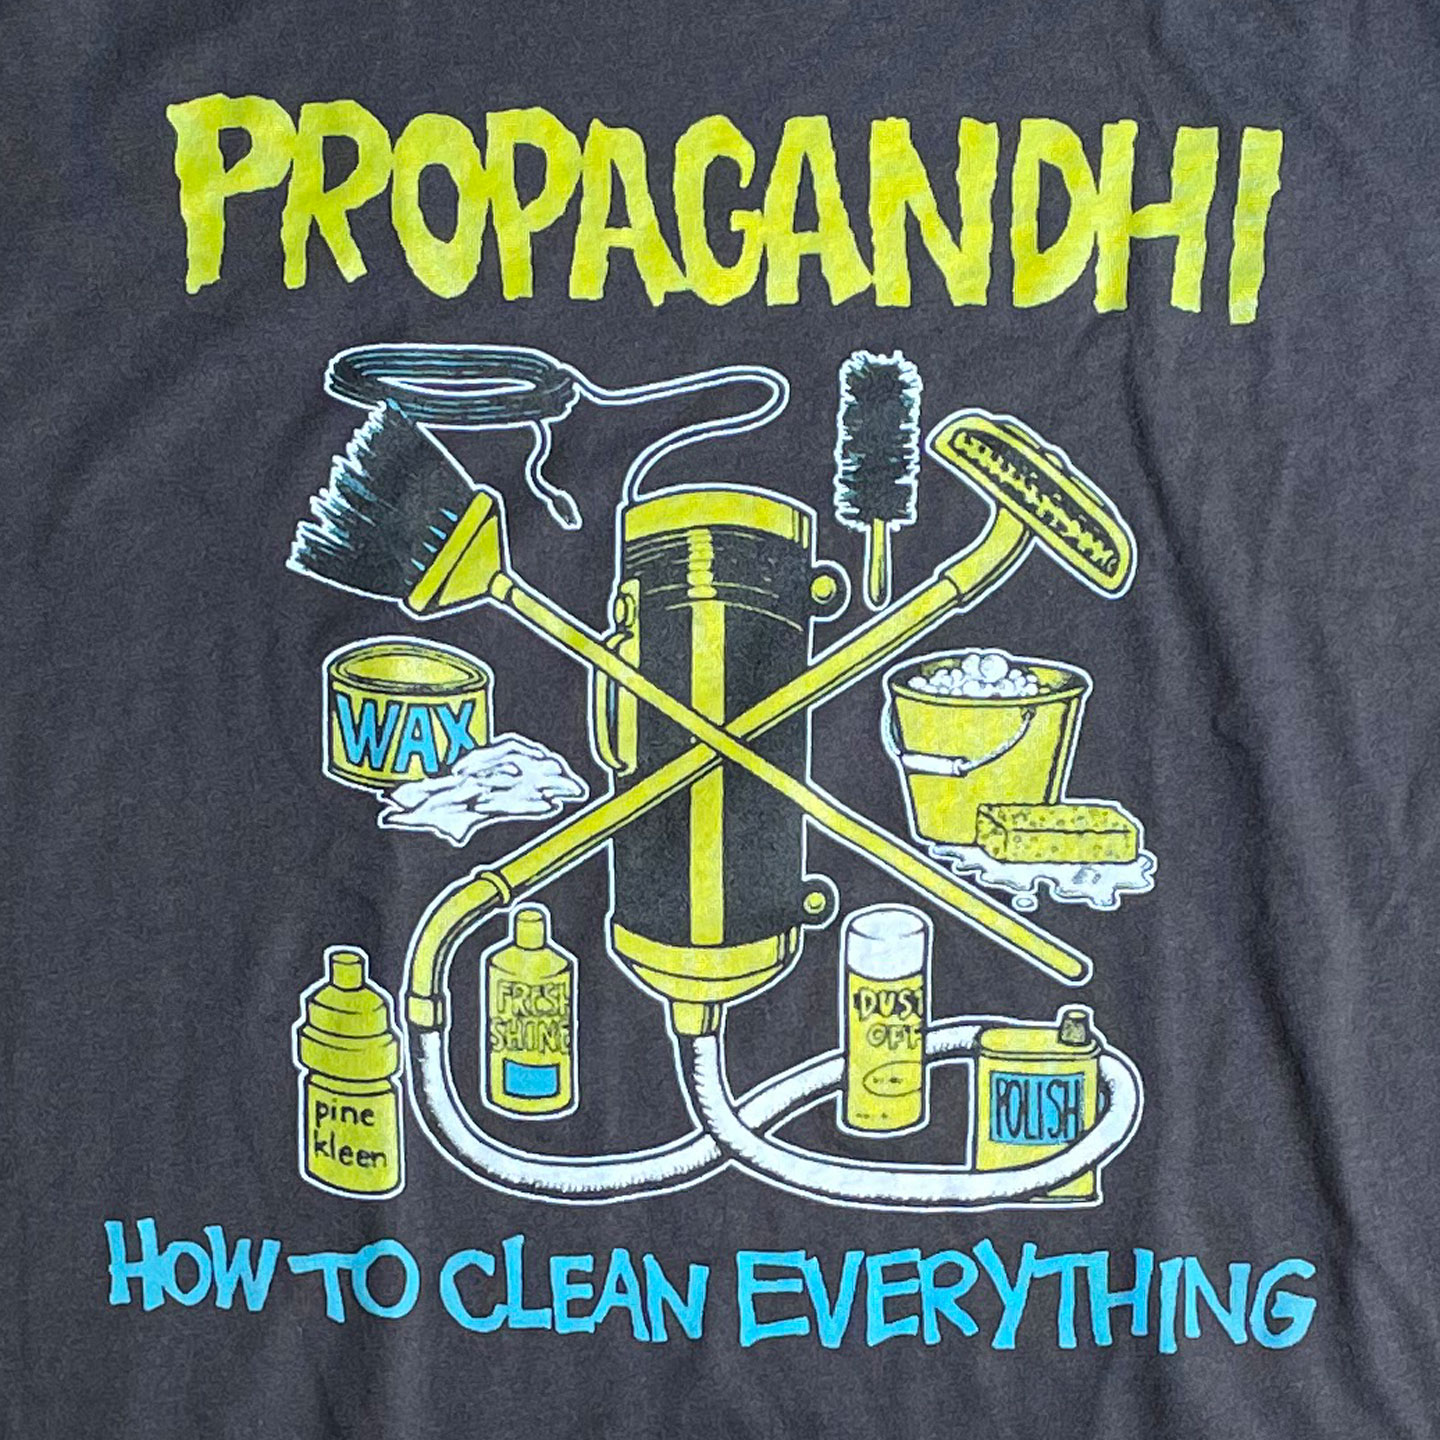 PROPAGANDHI Tシャツ How To Clean Everything オフィシャル!